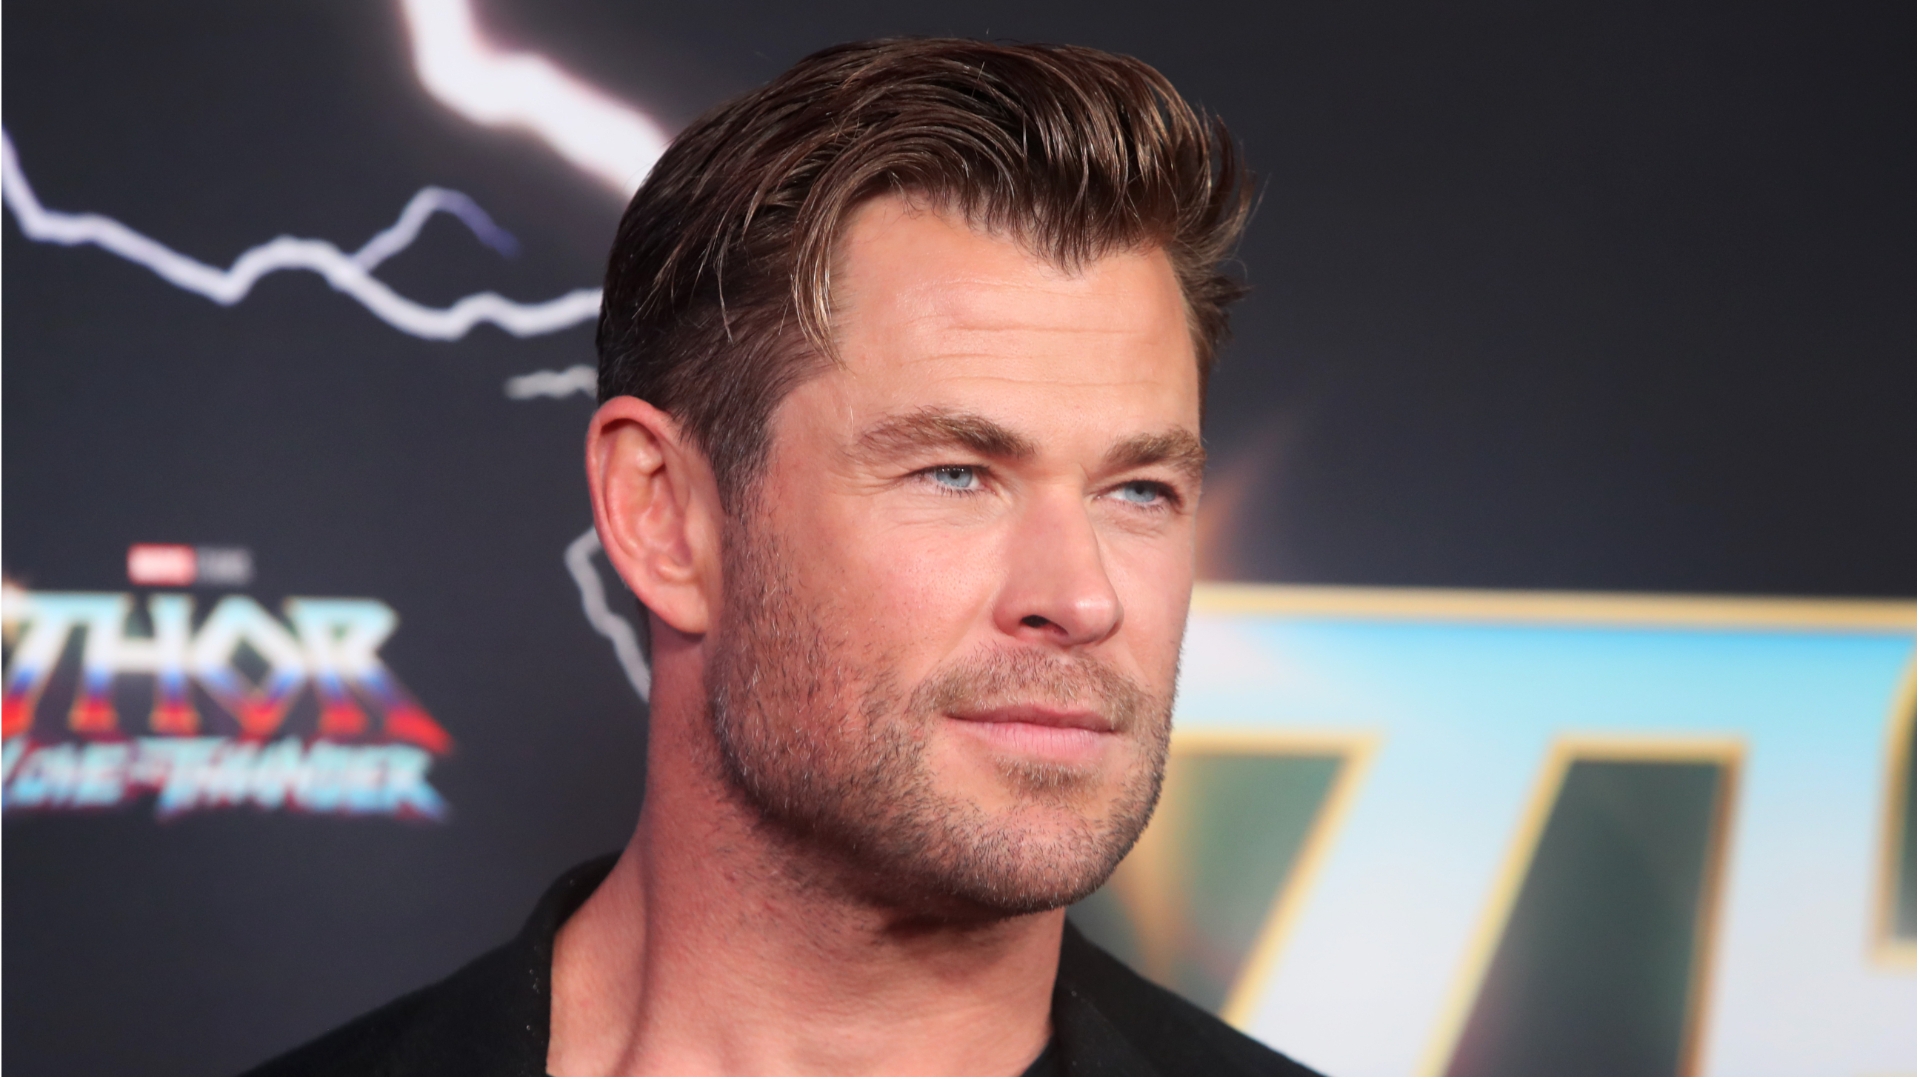 Chris Hemsworth won’t be hanging up Thor’s hammer anytime soon, Kevin Feige hints